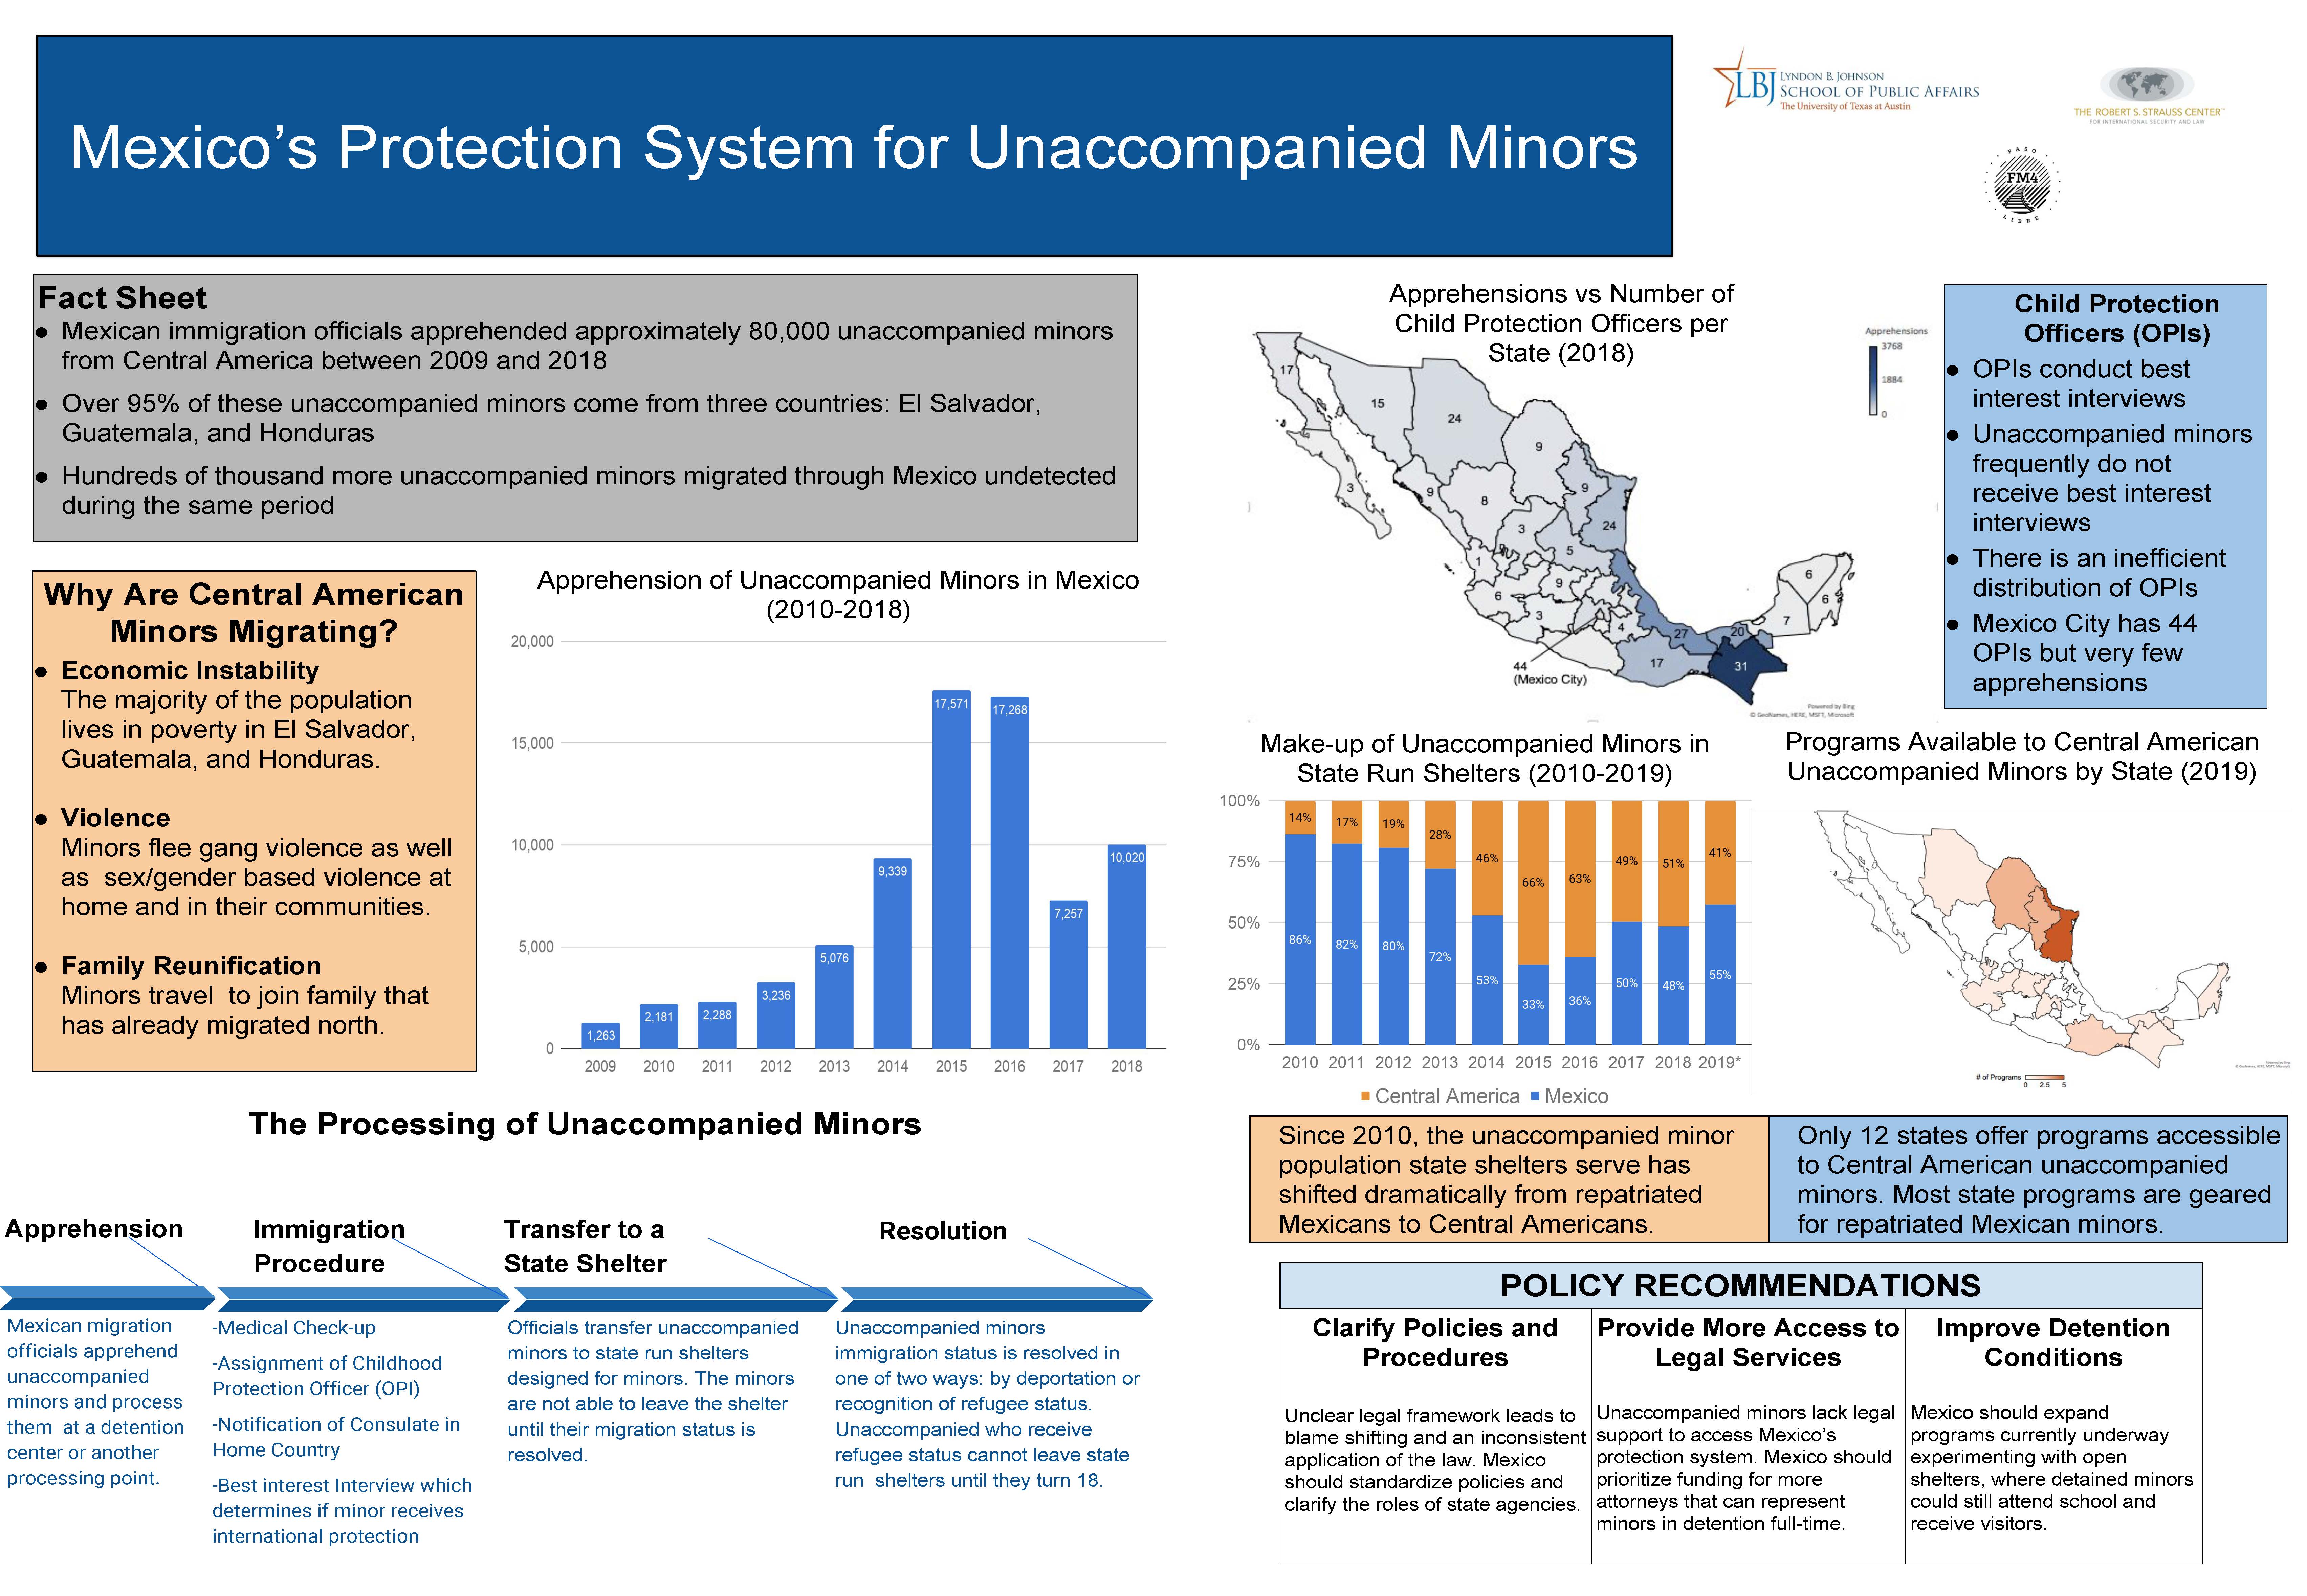 Innovation Bound 2019 research poster: Challenges for Unaccompanied Minors in Accessing Mexico's Protection System